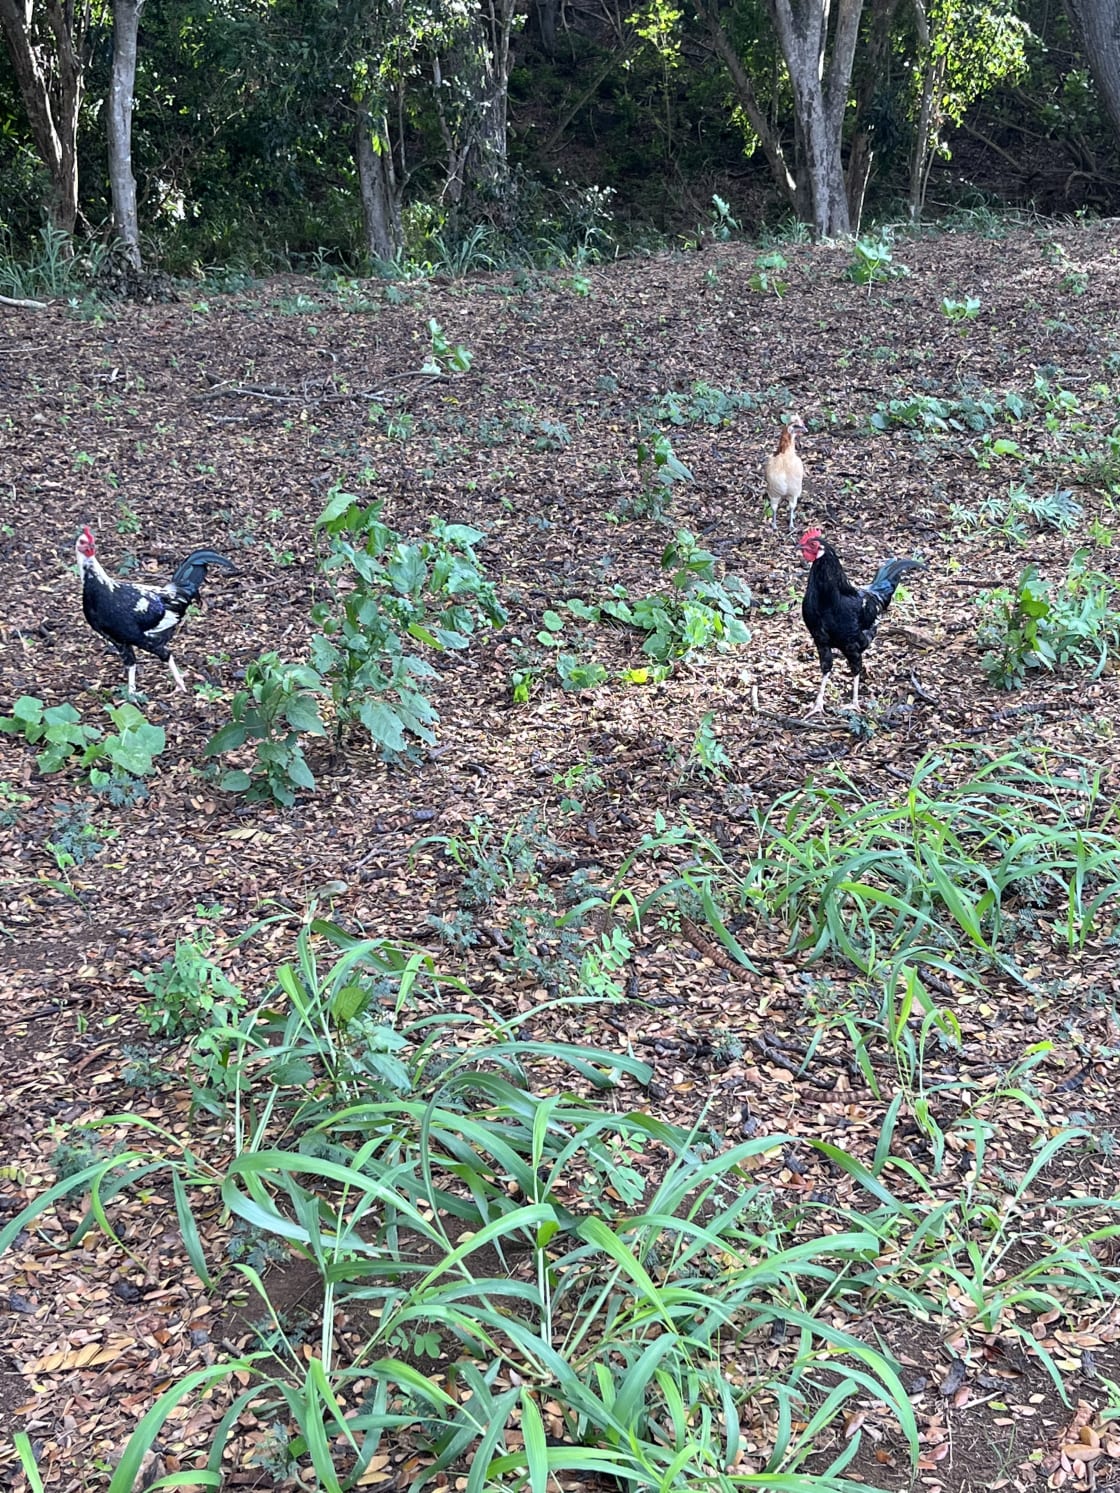 There are a few chickens and roosters on property.